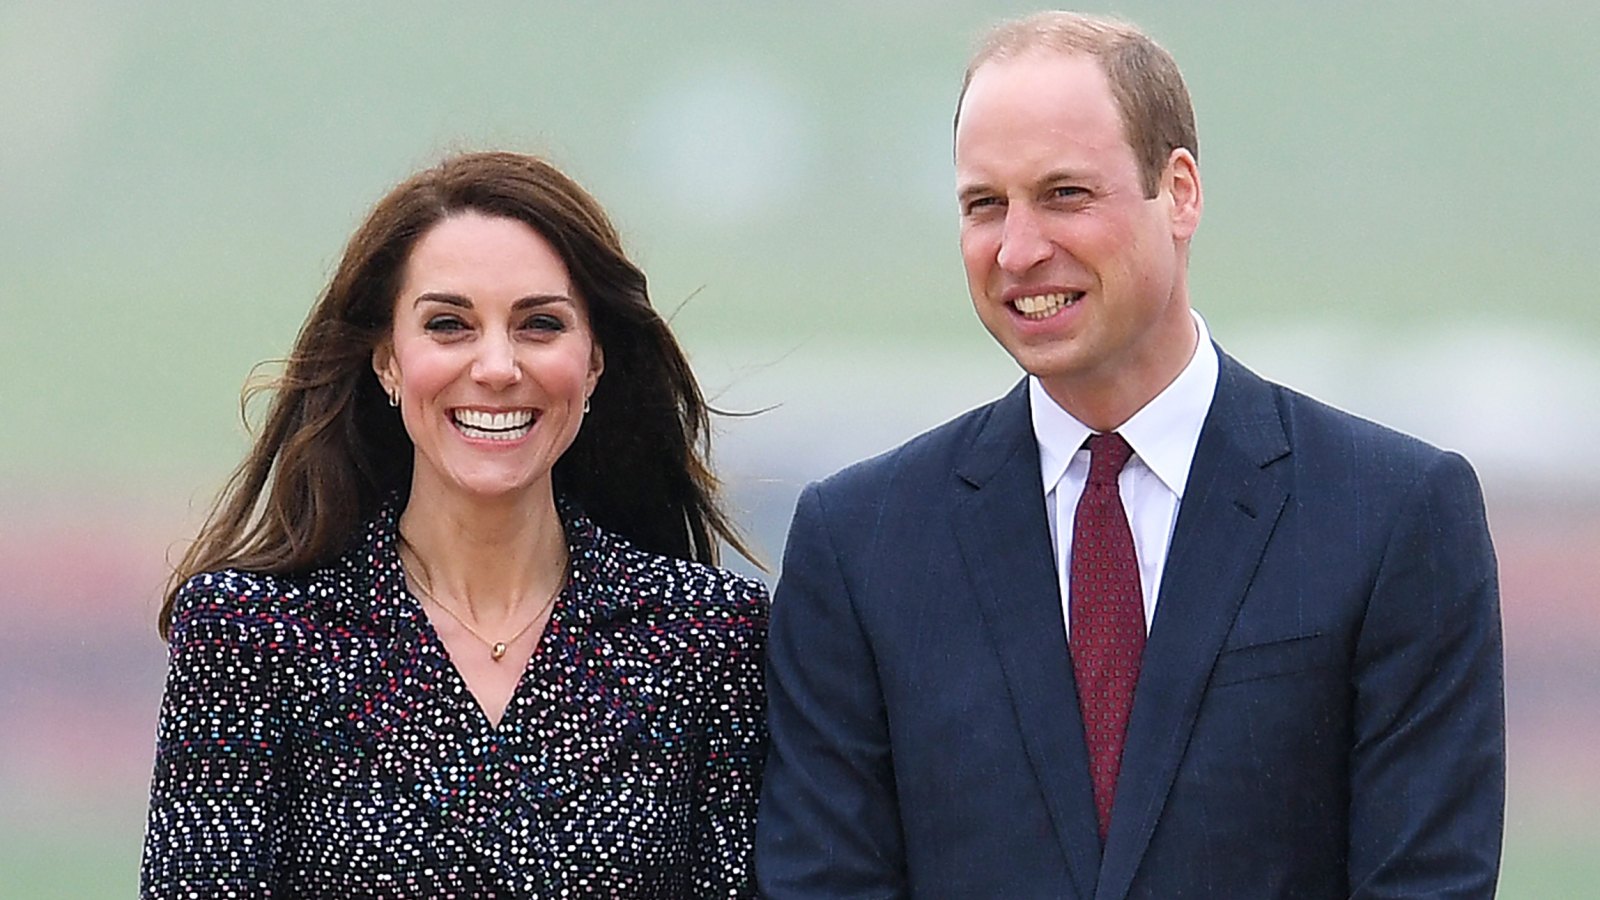 Prince William and Duchess Kate Share New Family Photo in Honor of Volunteers Week